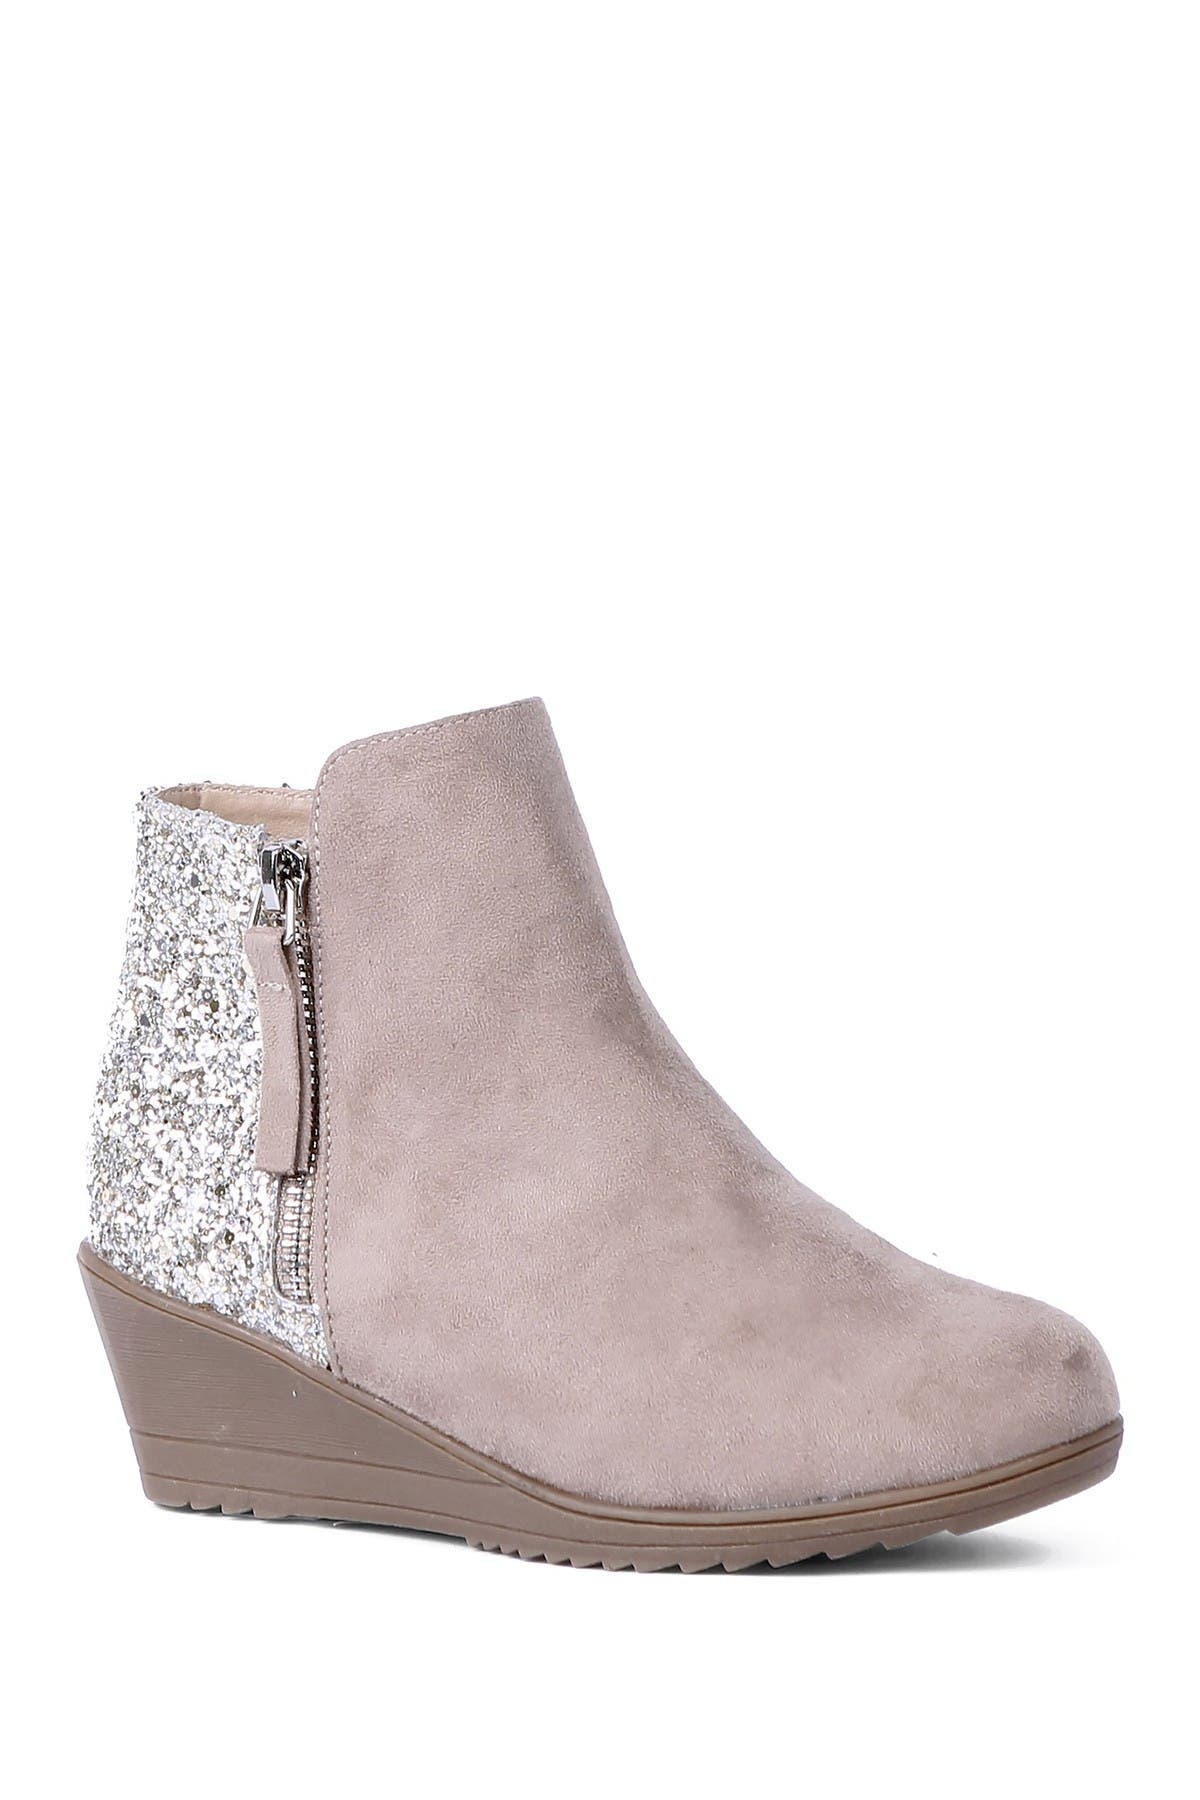 dolce vita suede wedge booties